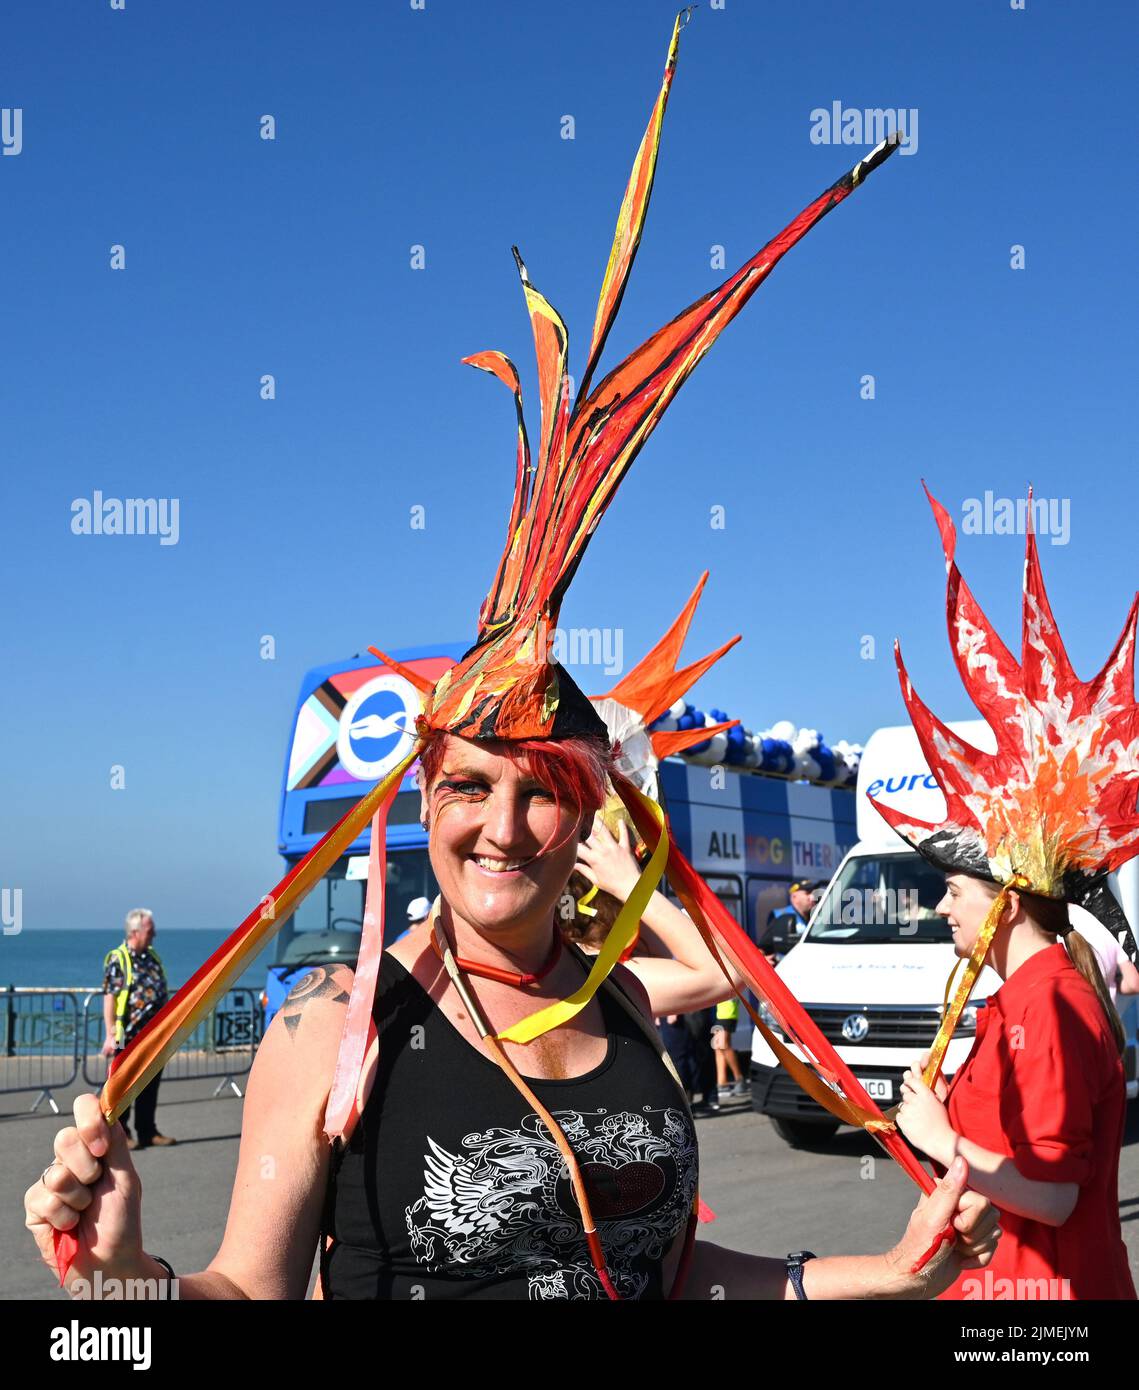 Brighton UK 6th August 2022 - Early arrivals get their costumes ready for Brighton and Hove Pride Parade on a beautiful hot sunny day. With good weather forecast large crowds are expected to attend the UK's biggest LGBTQ Pride festival in Brighton over the weekend : Credit Simon Dack / Alamy Live News Stock Photo